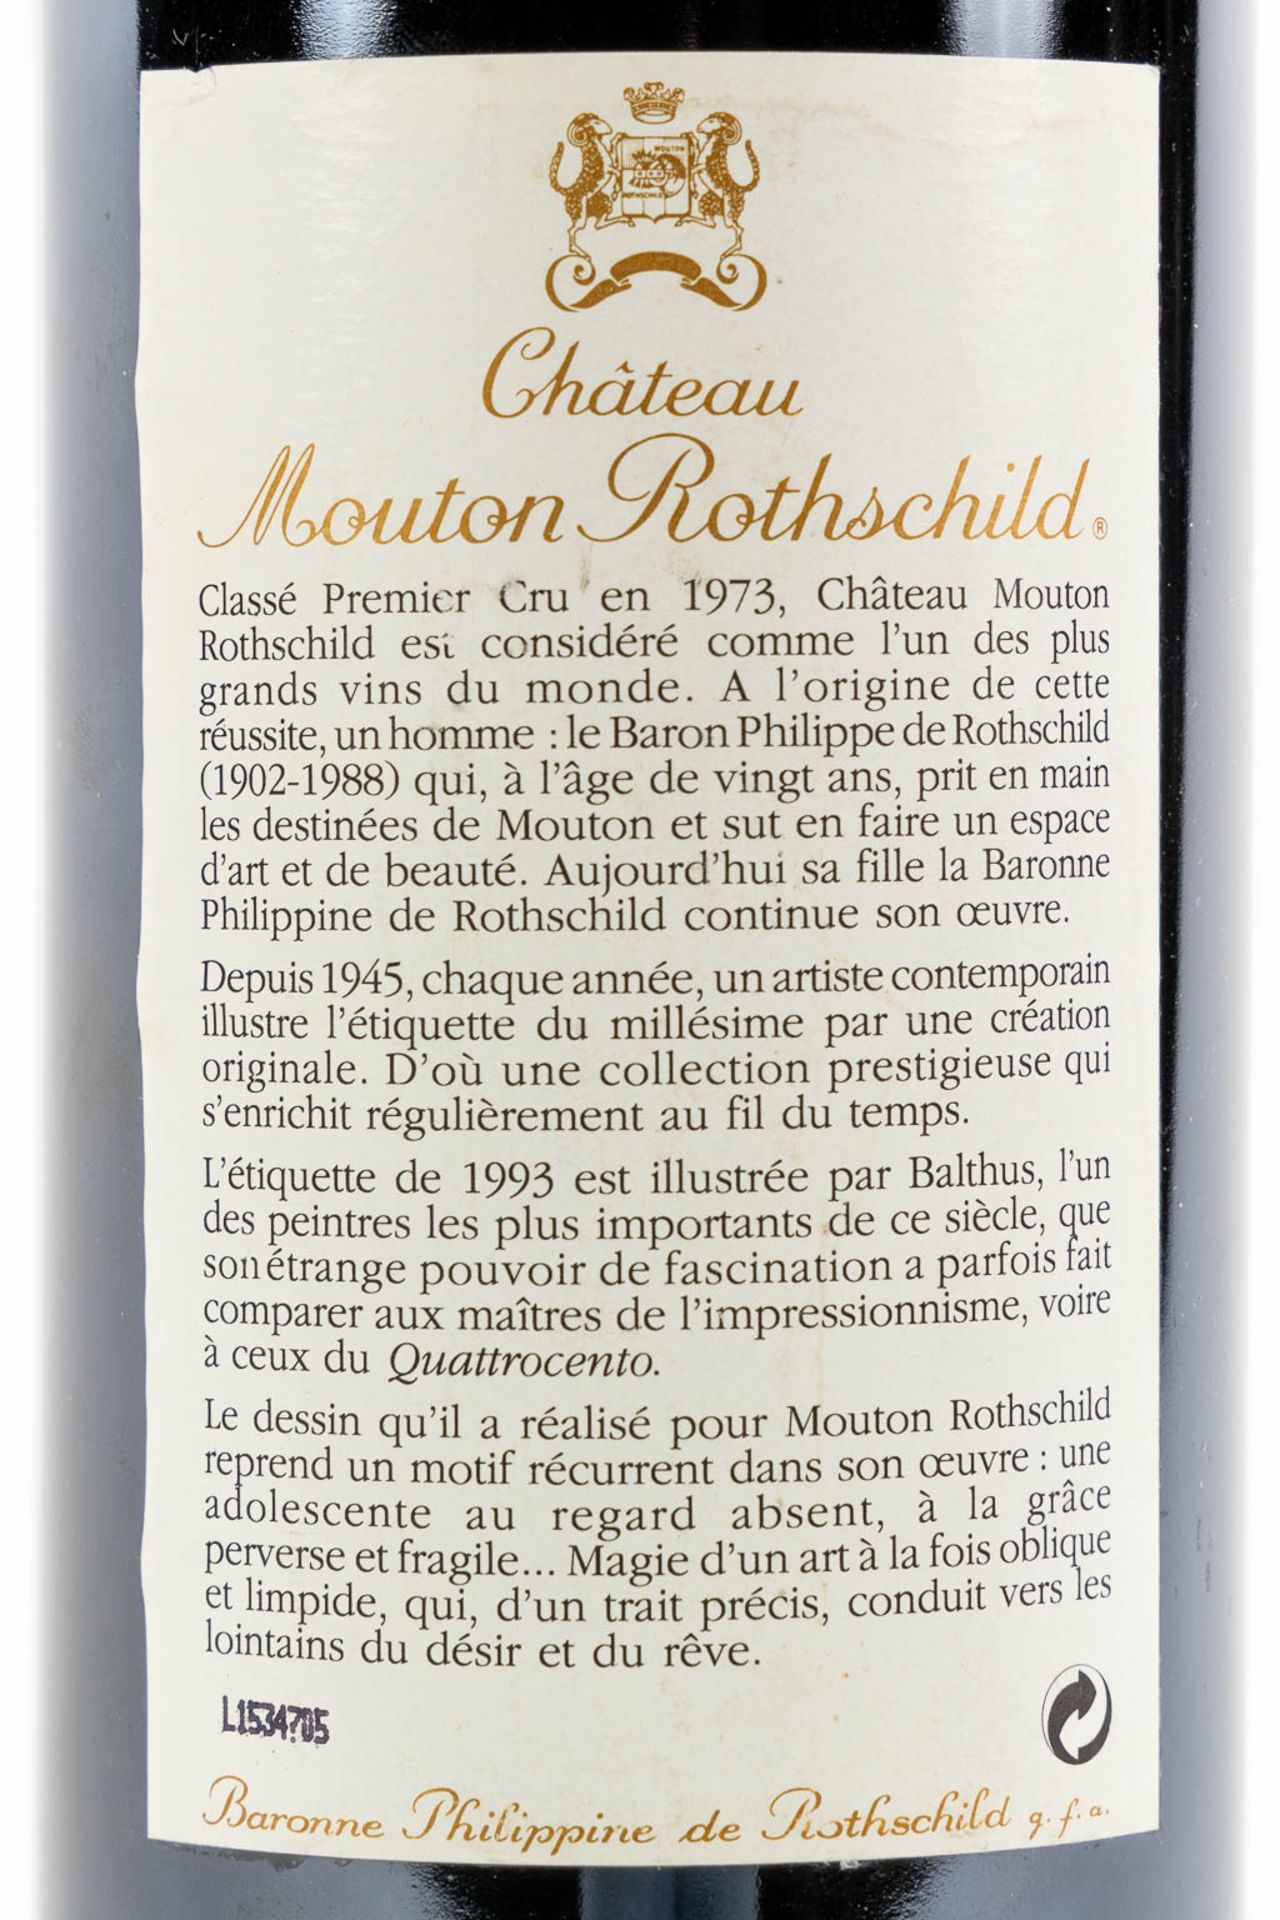 1993 Château Mouton Rothschild, Balthus - Image 3 of 3